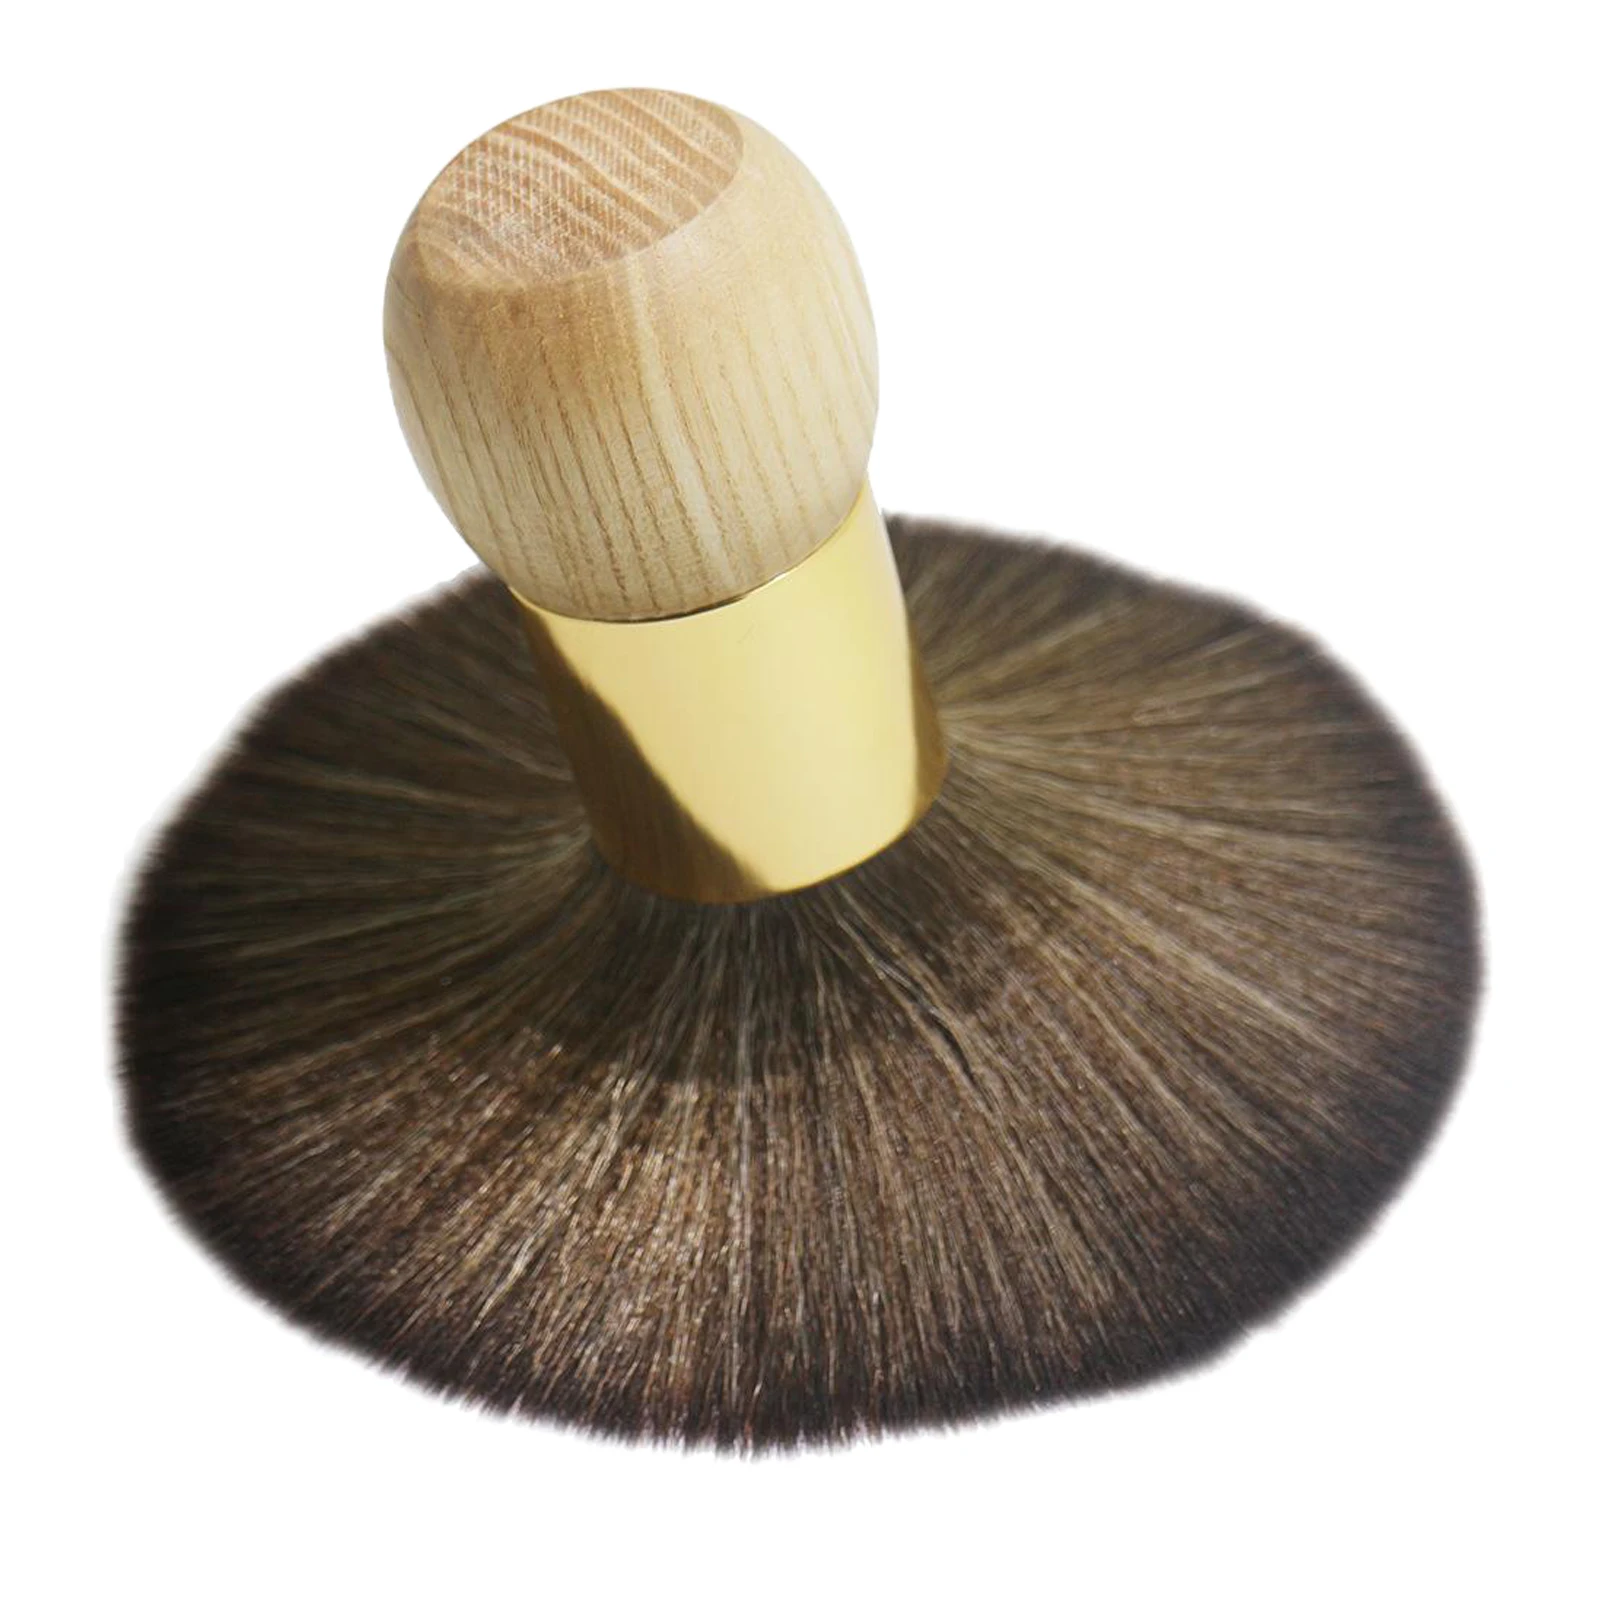 Professional Handle Wooden Neck Duster Brush Hairbrush for Barber Hairdressing Styling Tool Cleaning